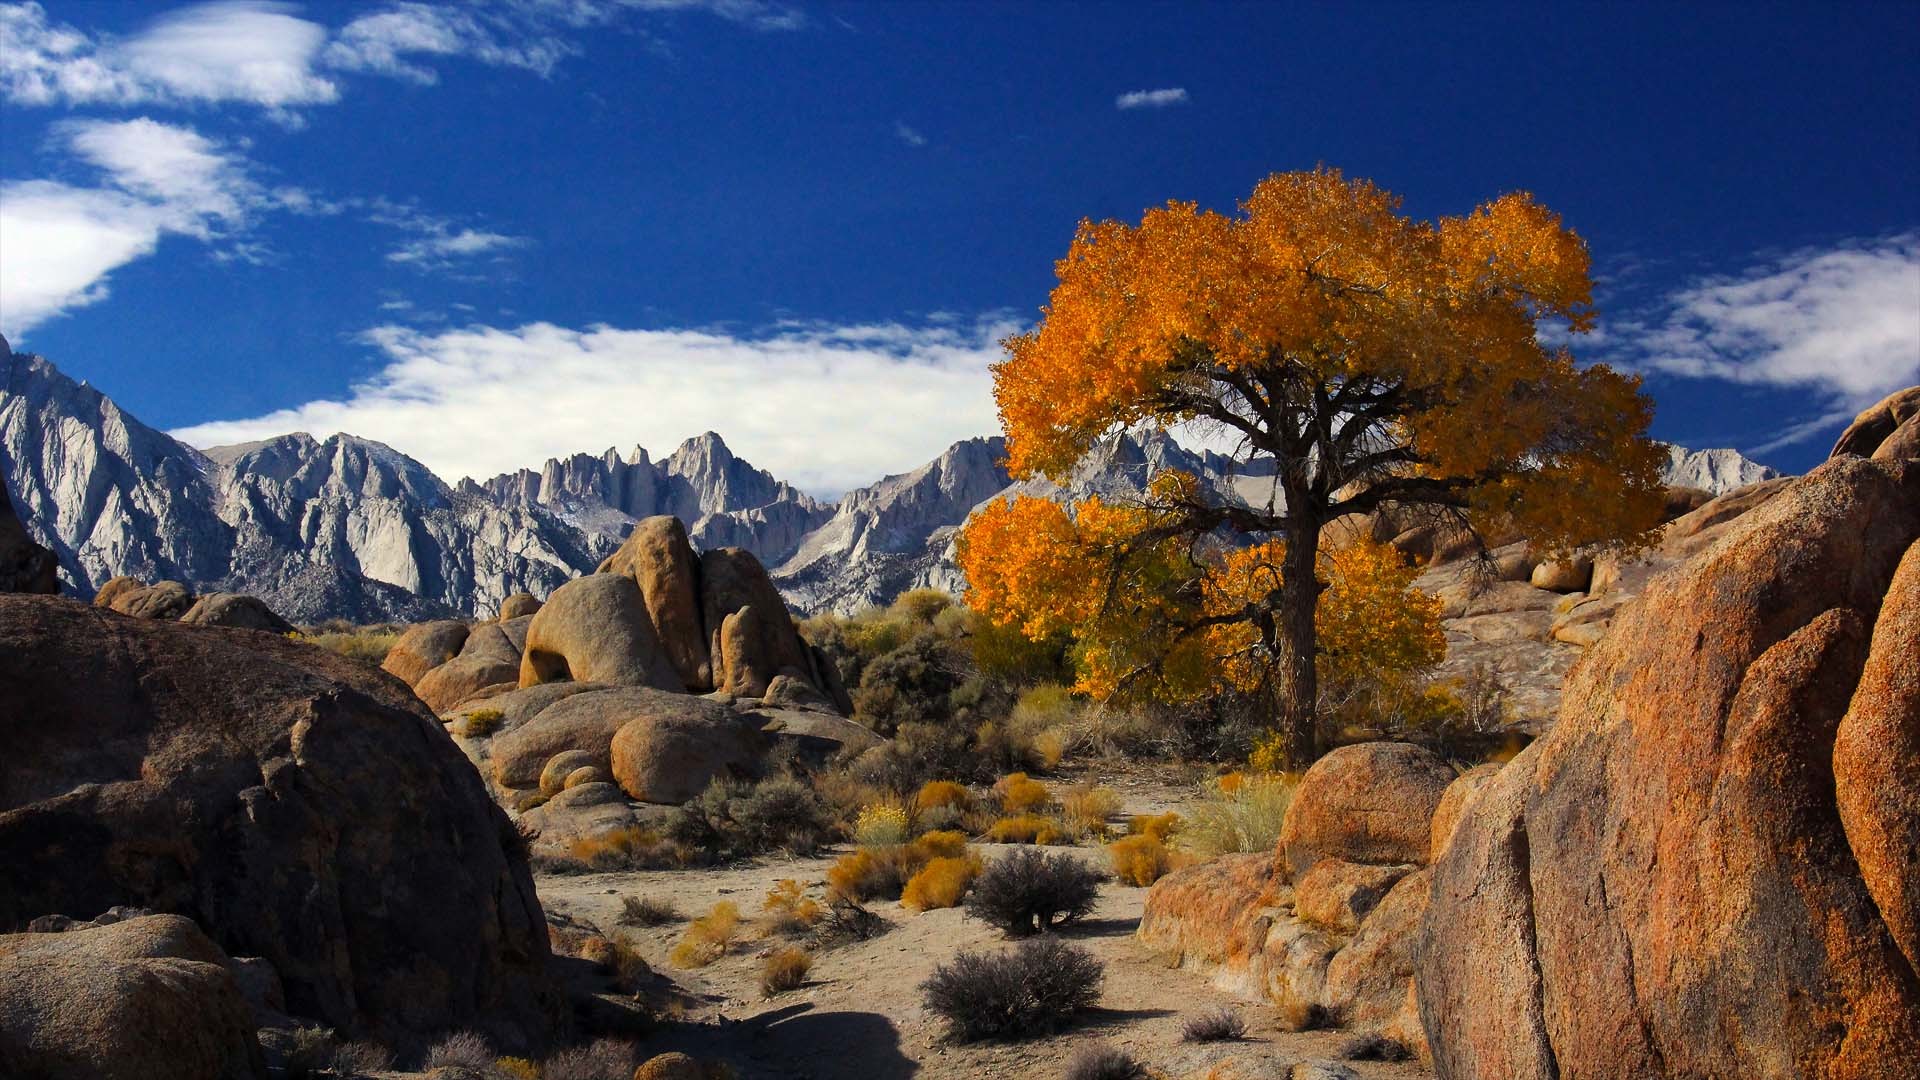 1920x1080 Autumn In Alabama Hills With Mount Whitney The Highest Peak In The United  States And Sierra Nevada California Desktop Hd Wallpaper 1920Ã1080